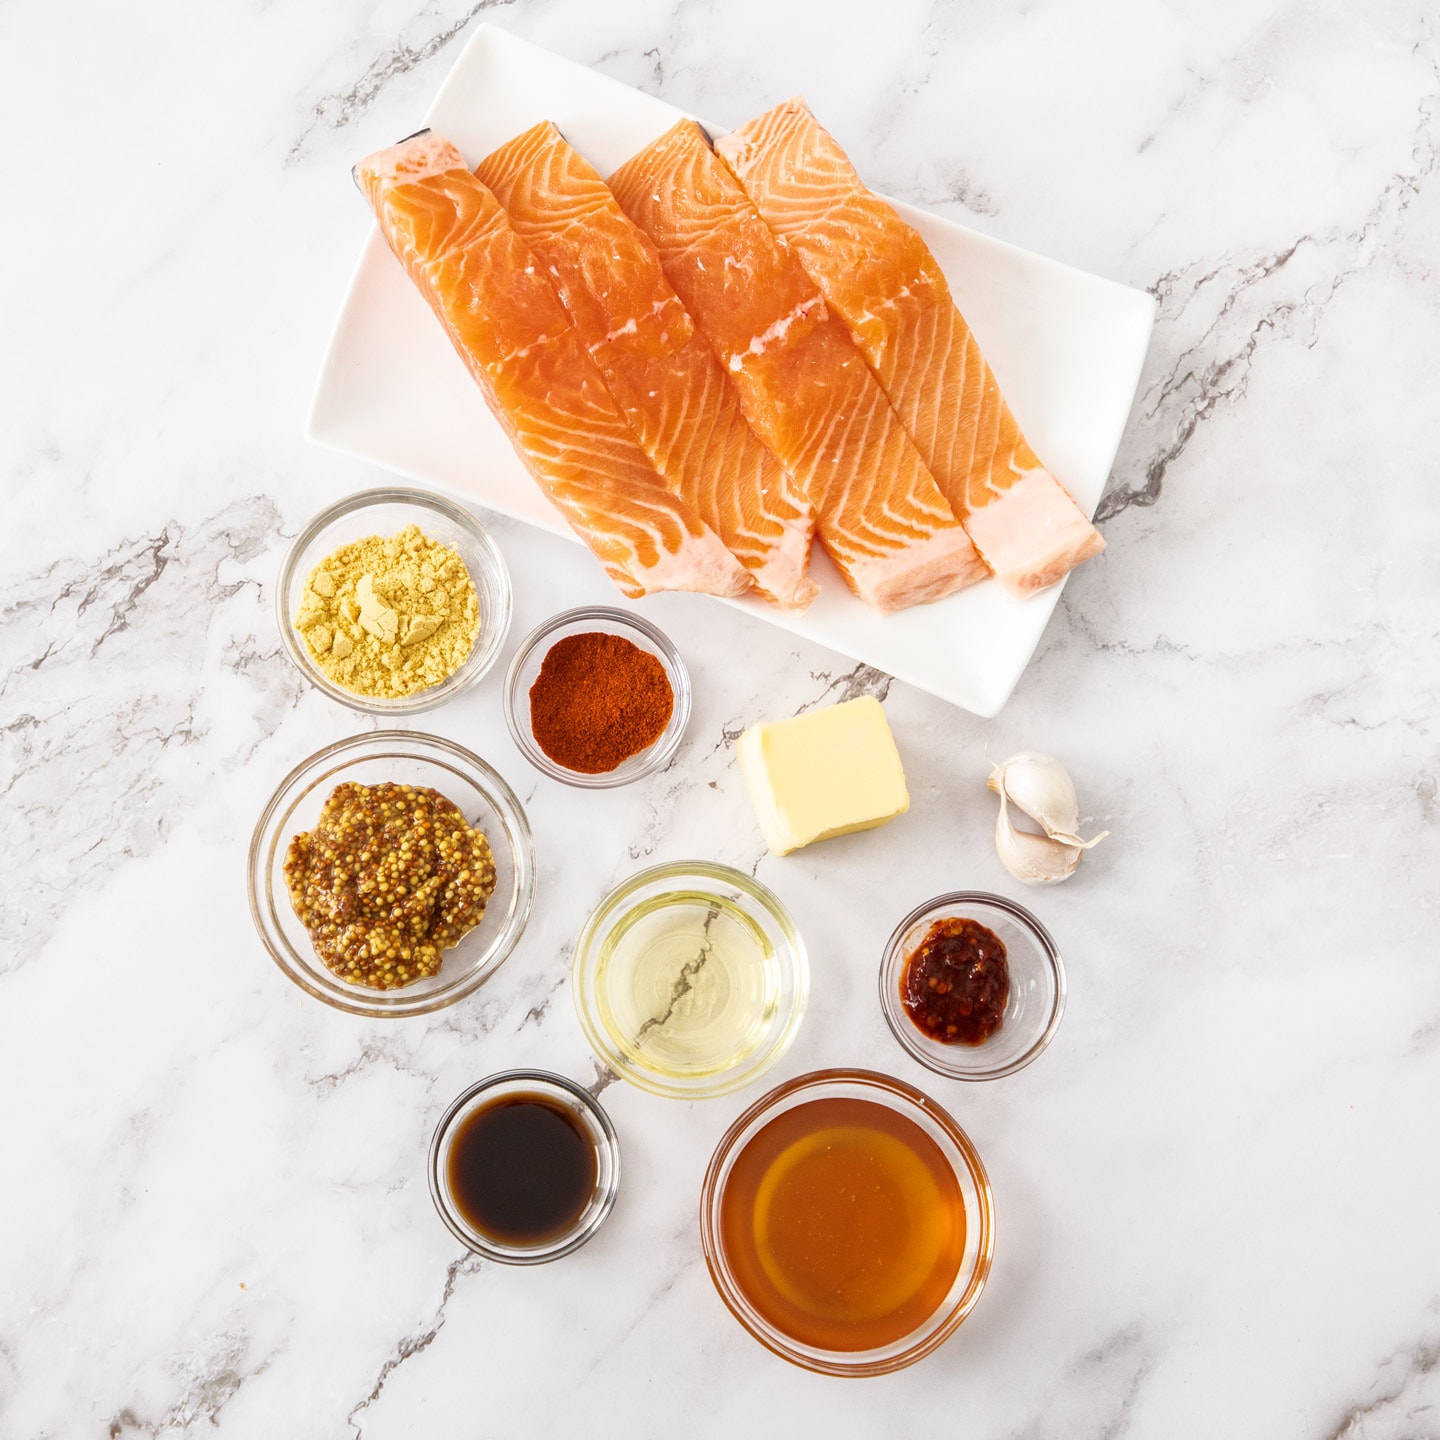 Ingredients for honey mustard salmon on a marble benchtop.